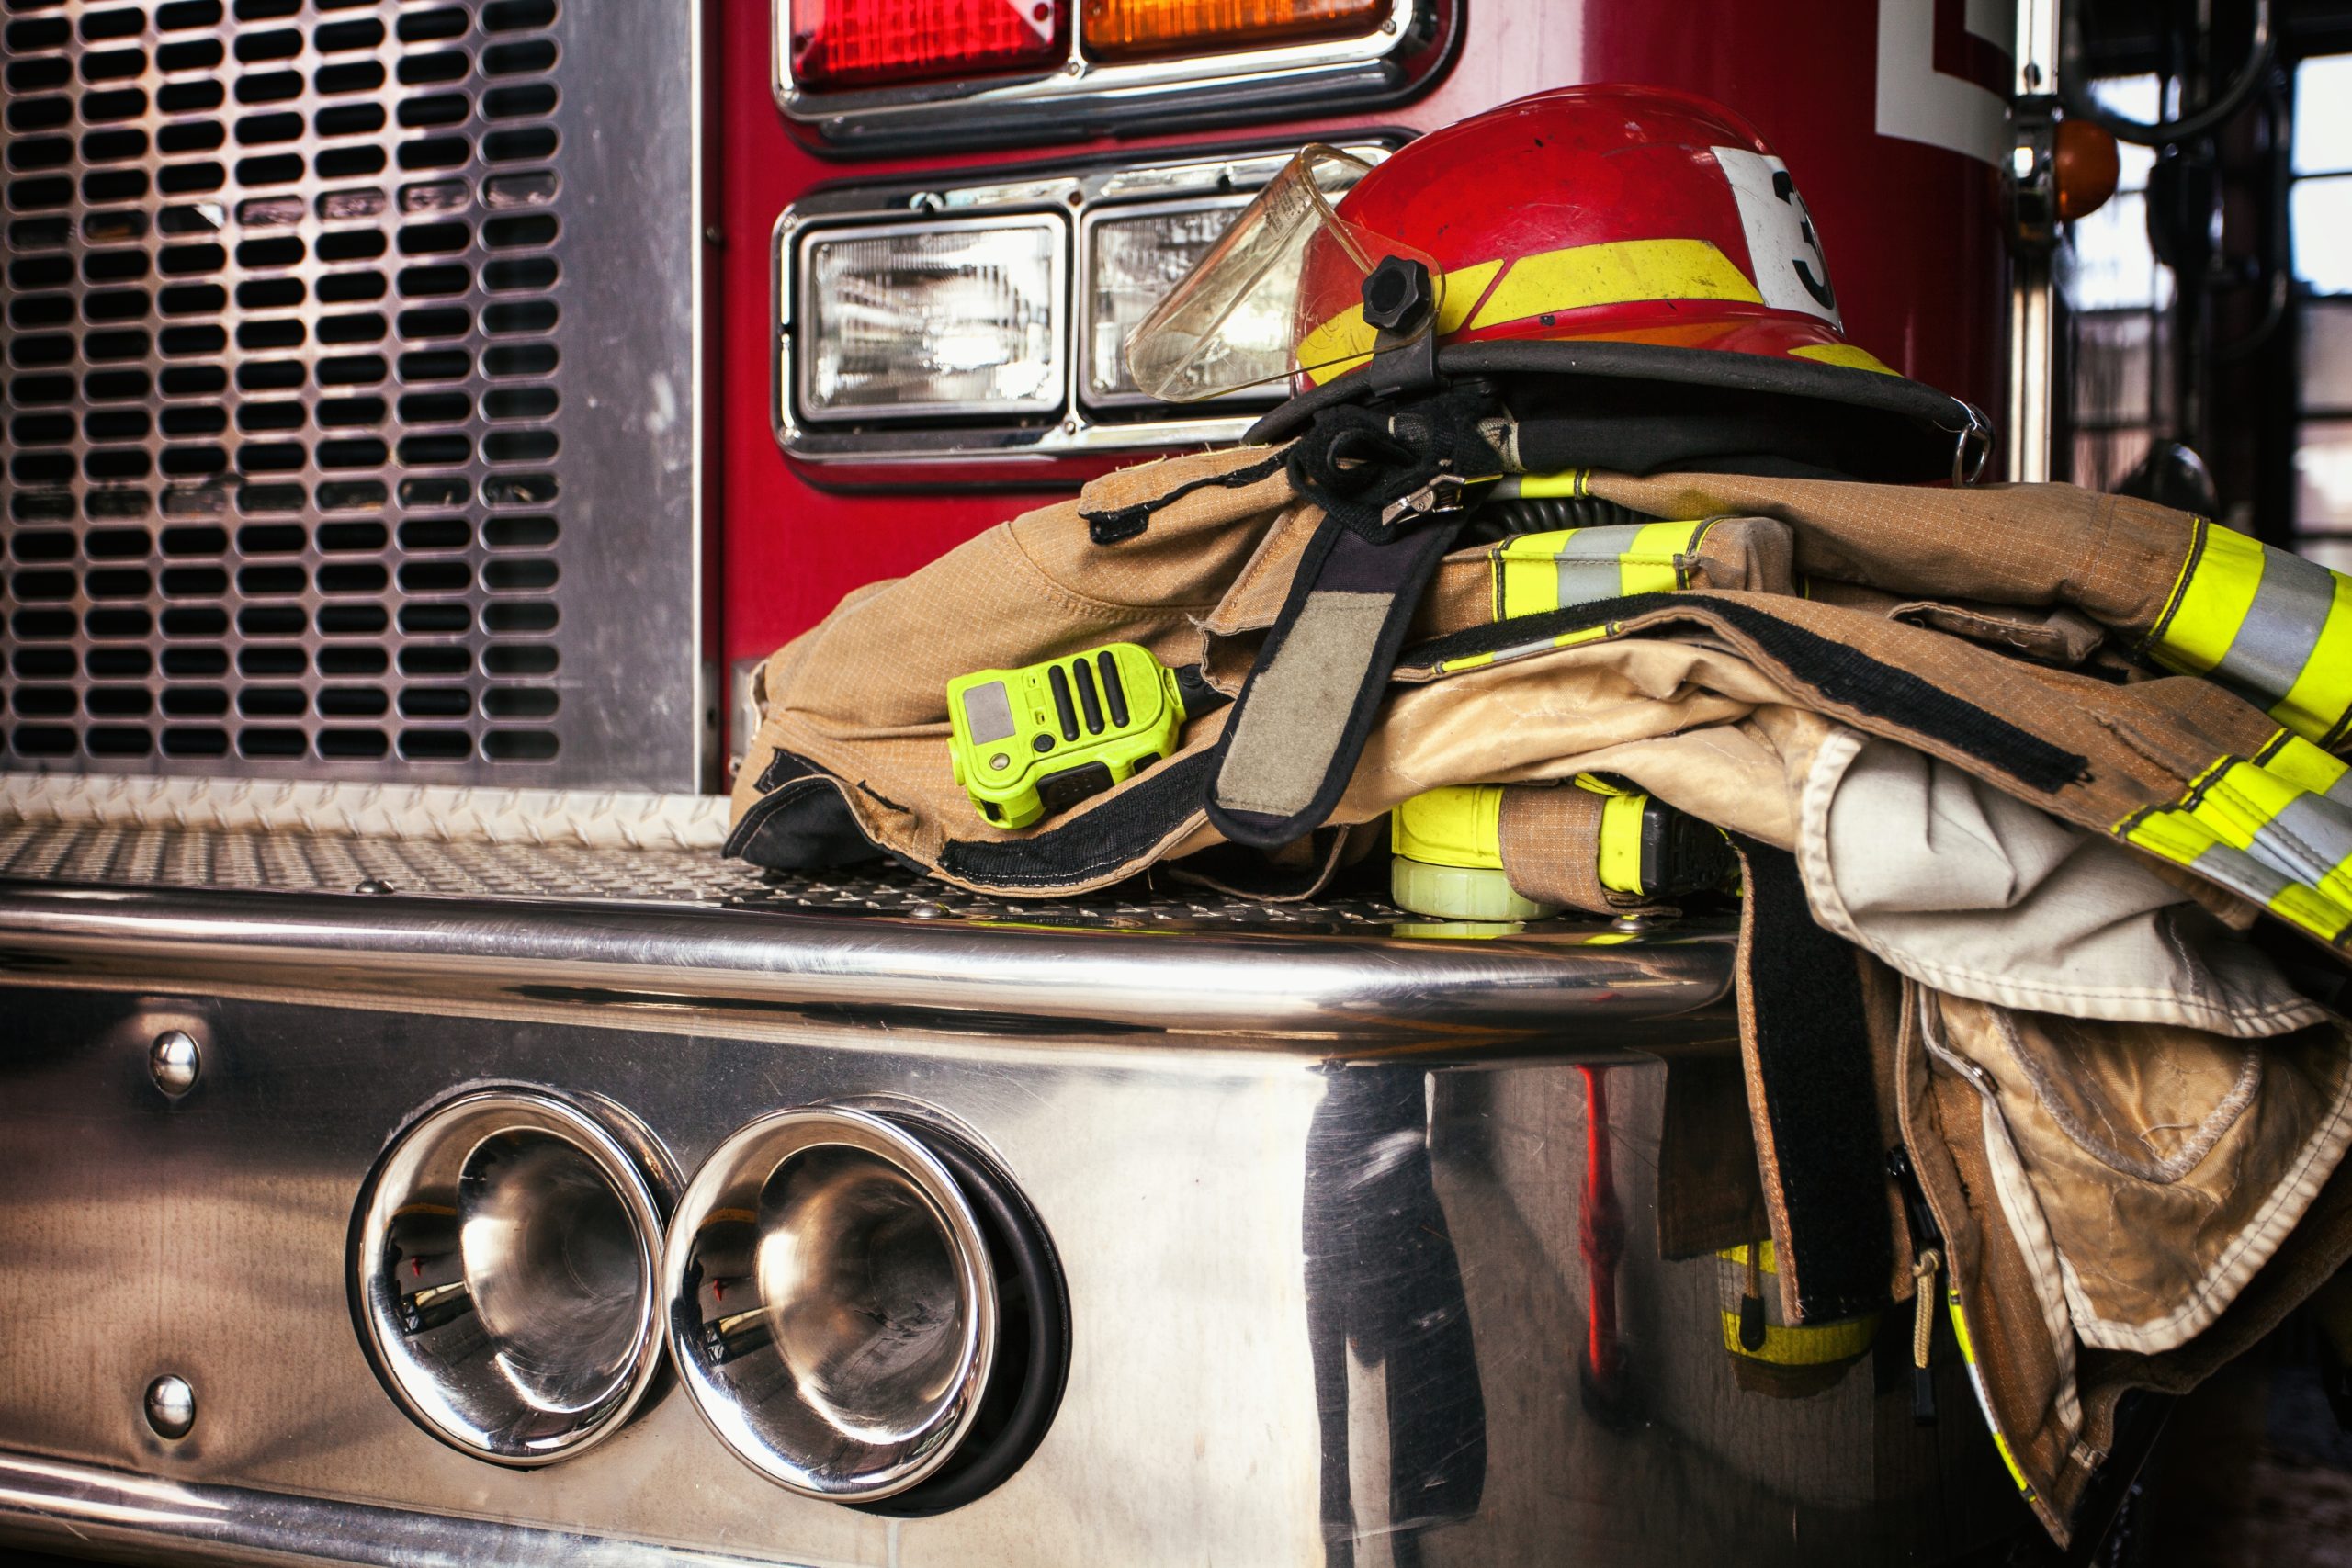 Firefighters Face Heart Problems From Chemical Exposures, Stress: Study ...